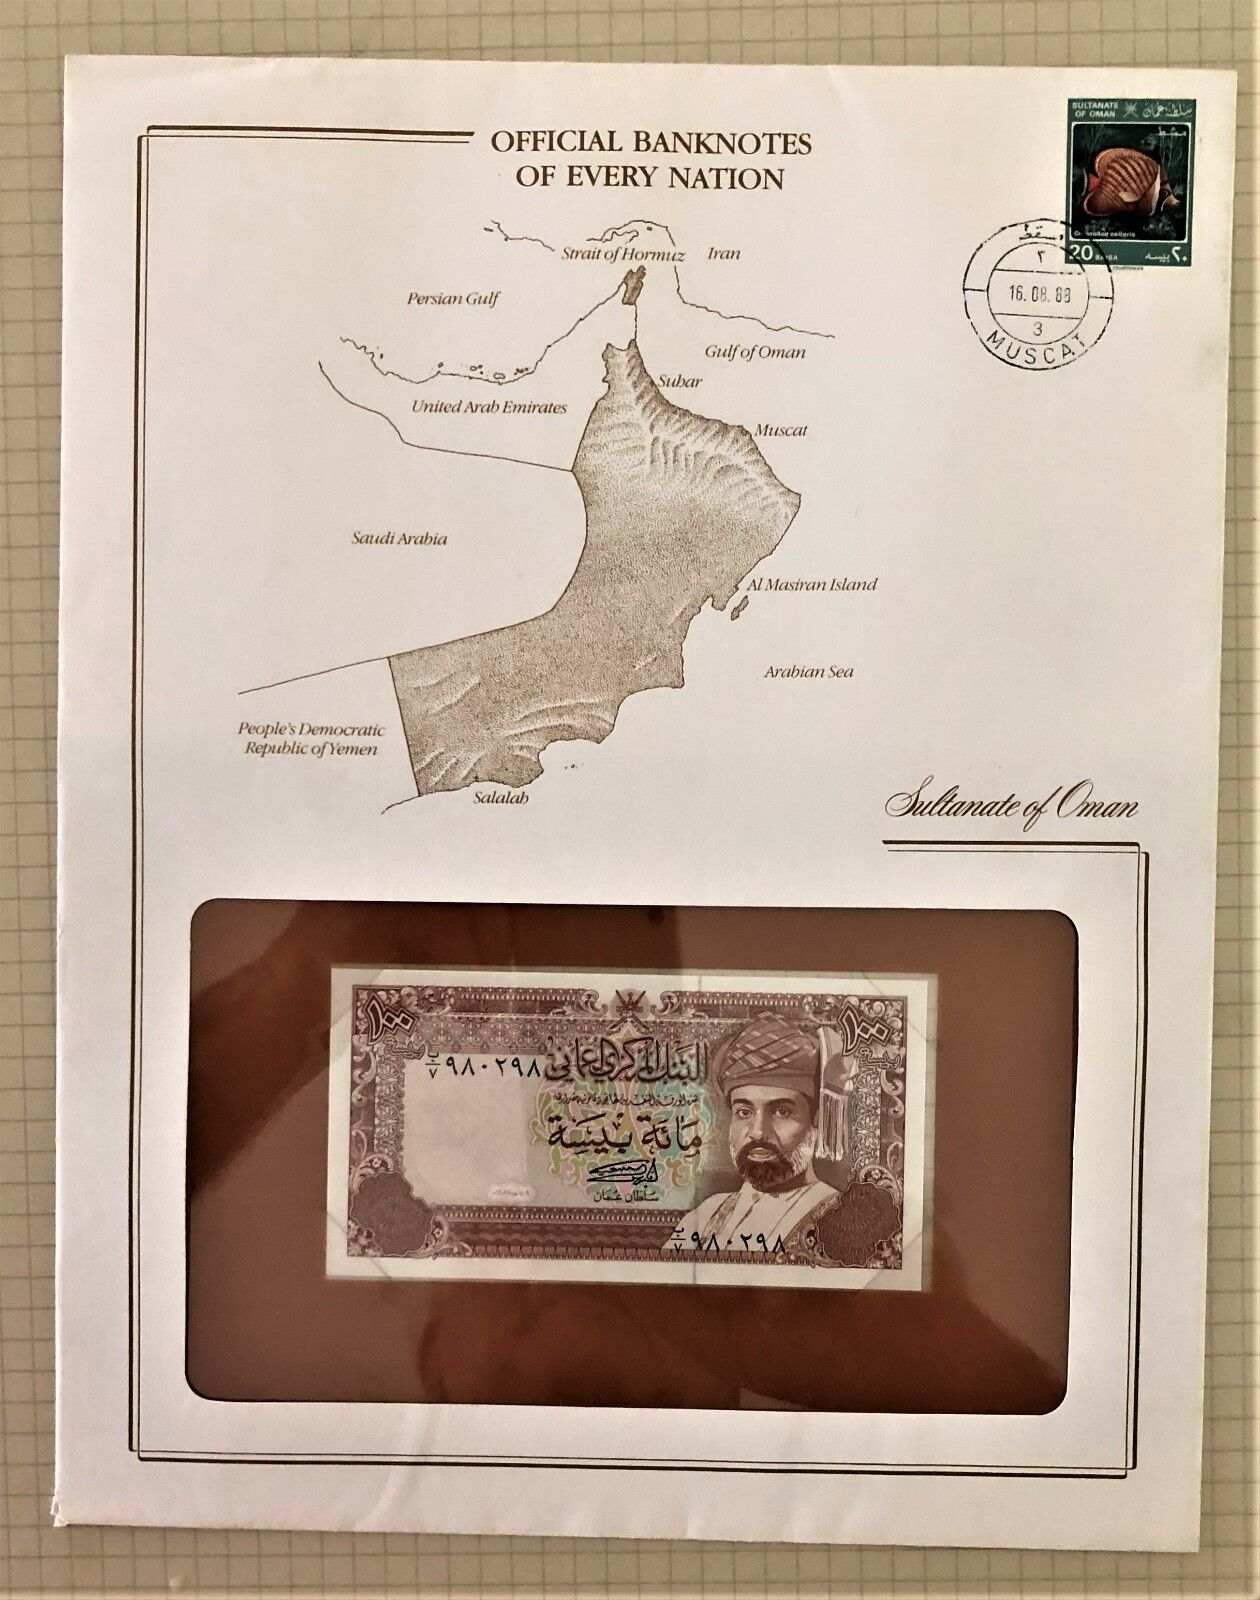 OMAN BANK NOTE 100 BAISA PICK# 22 MUSCAT STAMPED WINDOW ENVELOPE with MAP & INFO